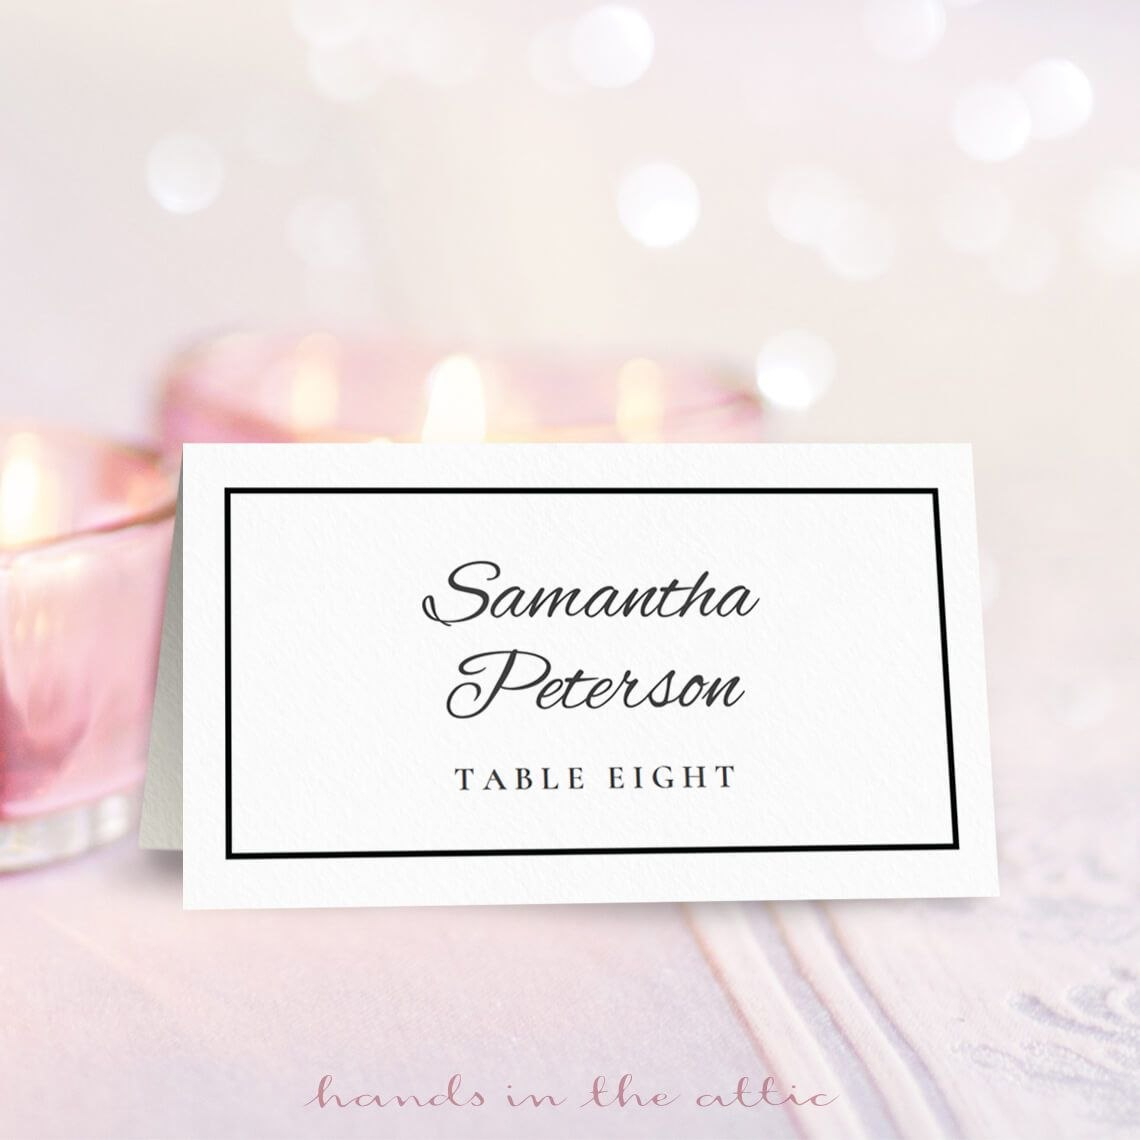 Free Wedding Place Card Templates for Place Card Setting Template